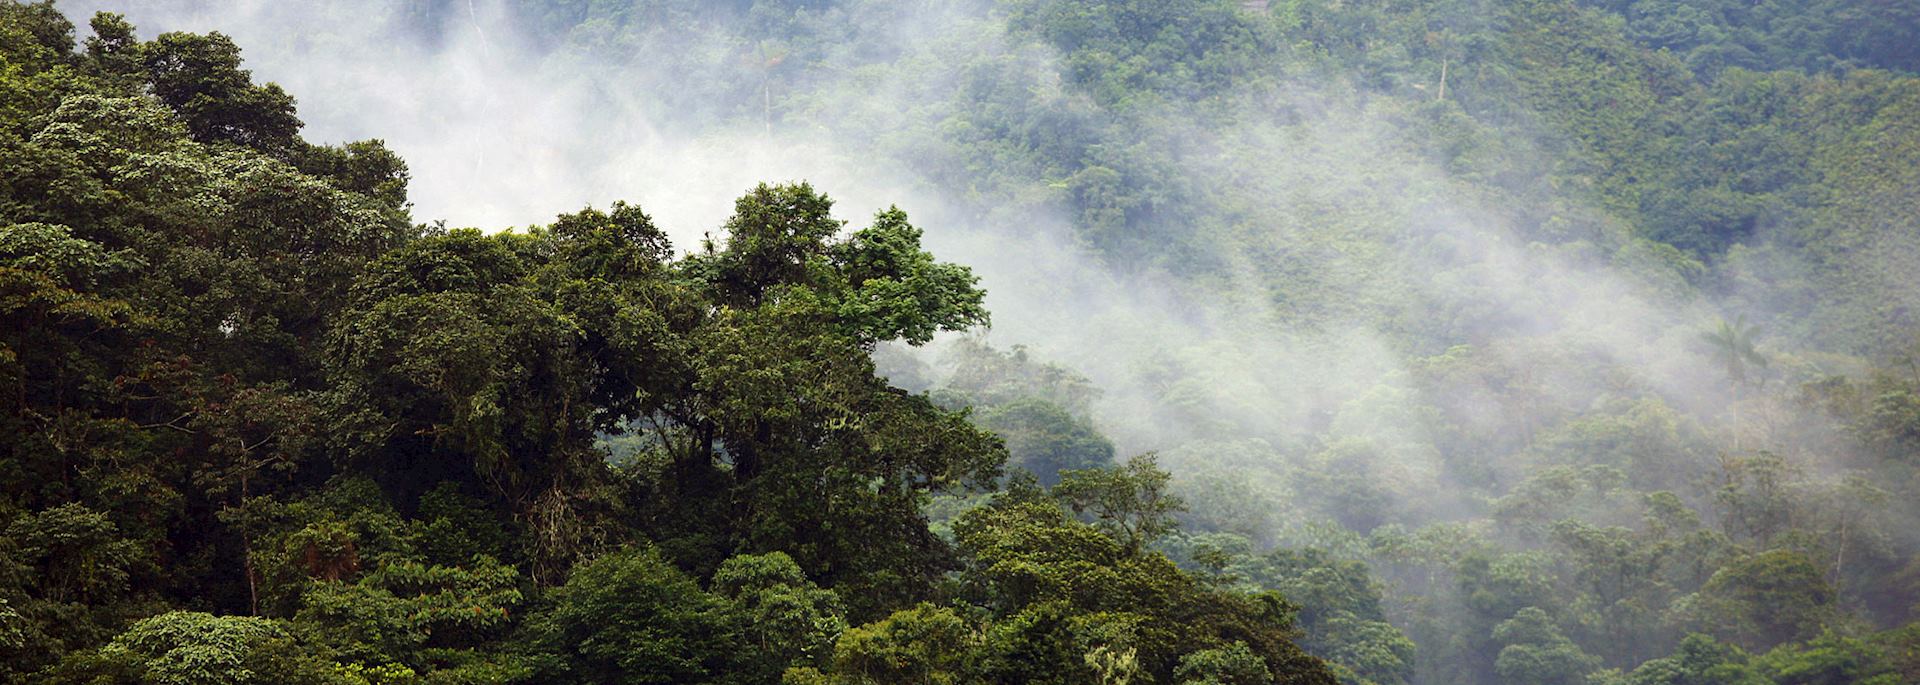 The Cloudforest